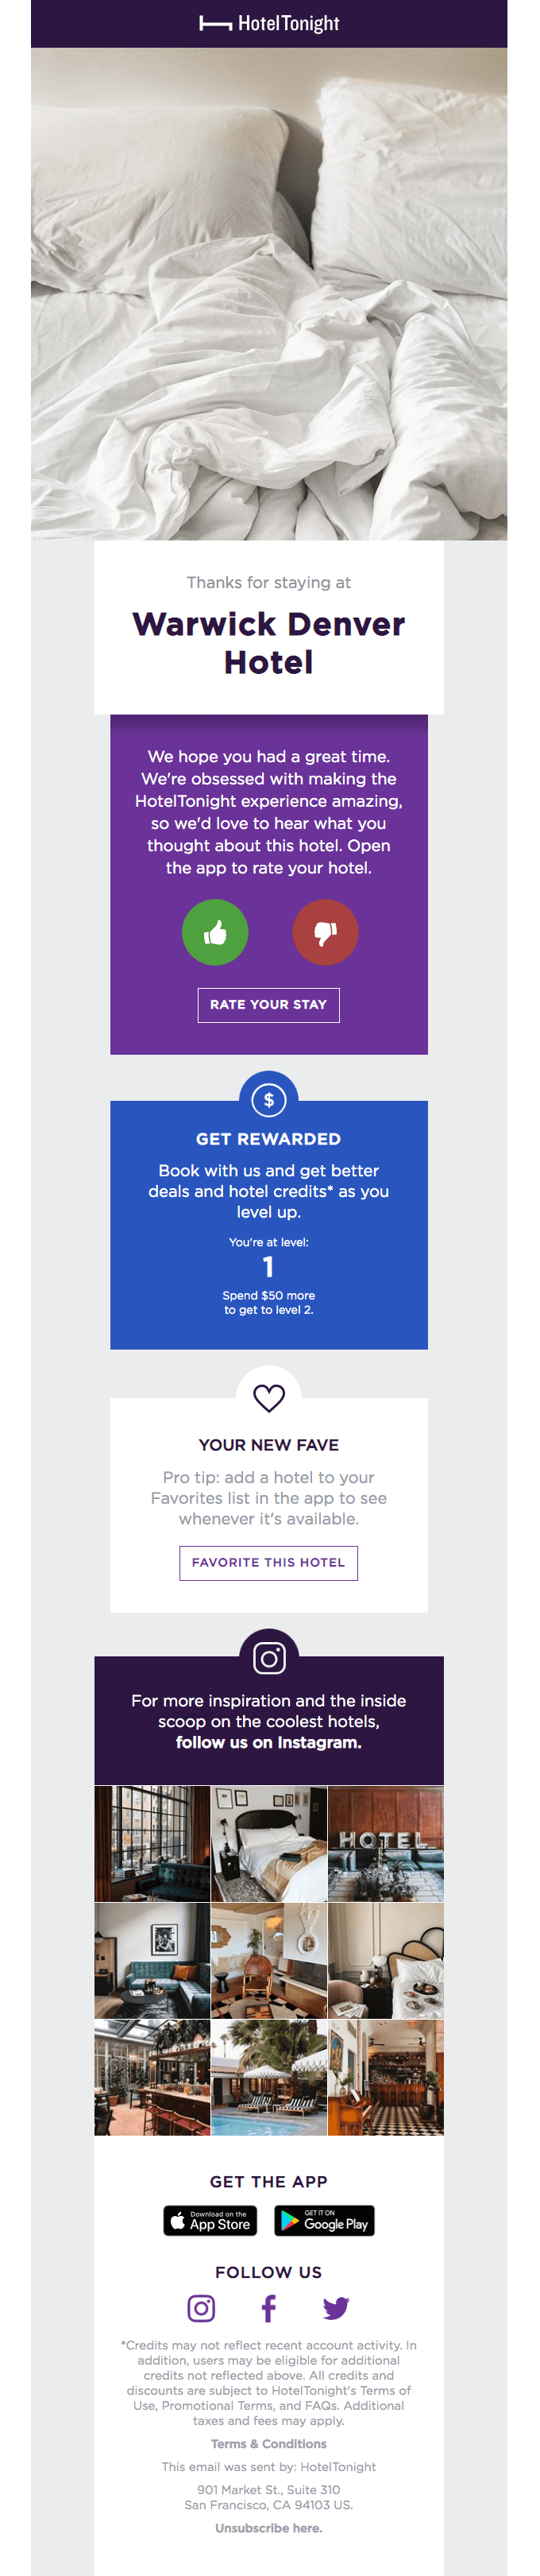 Thank you email from HotelTonight